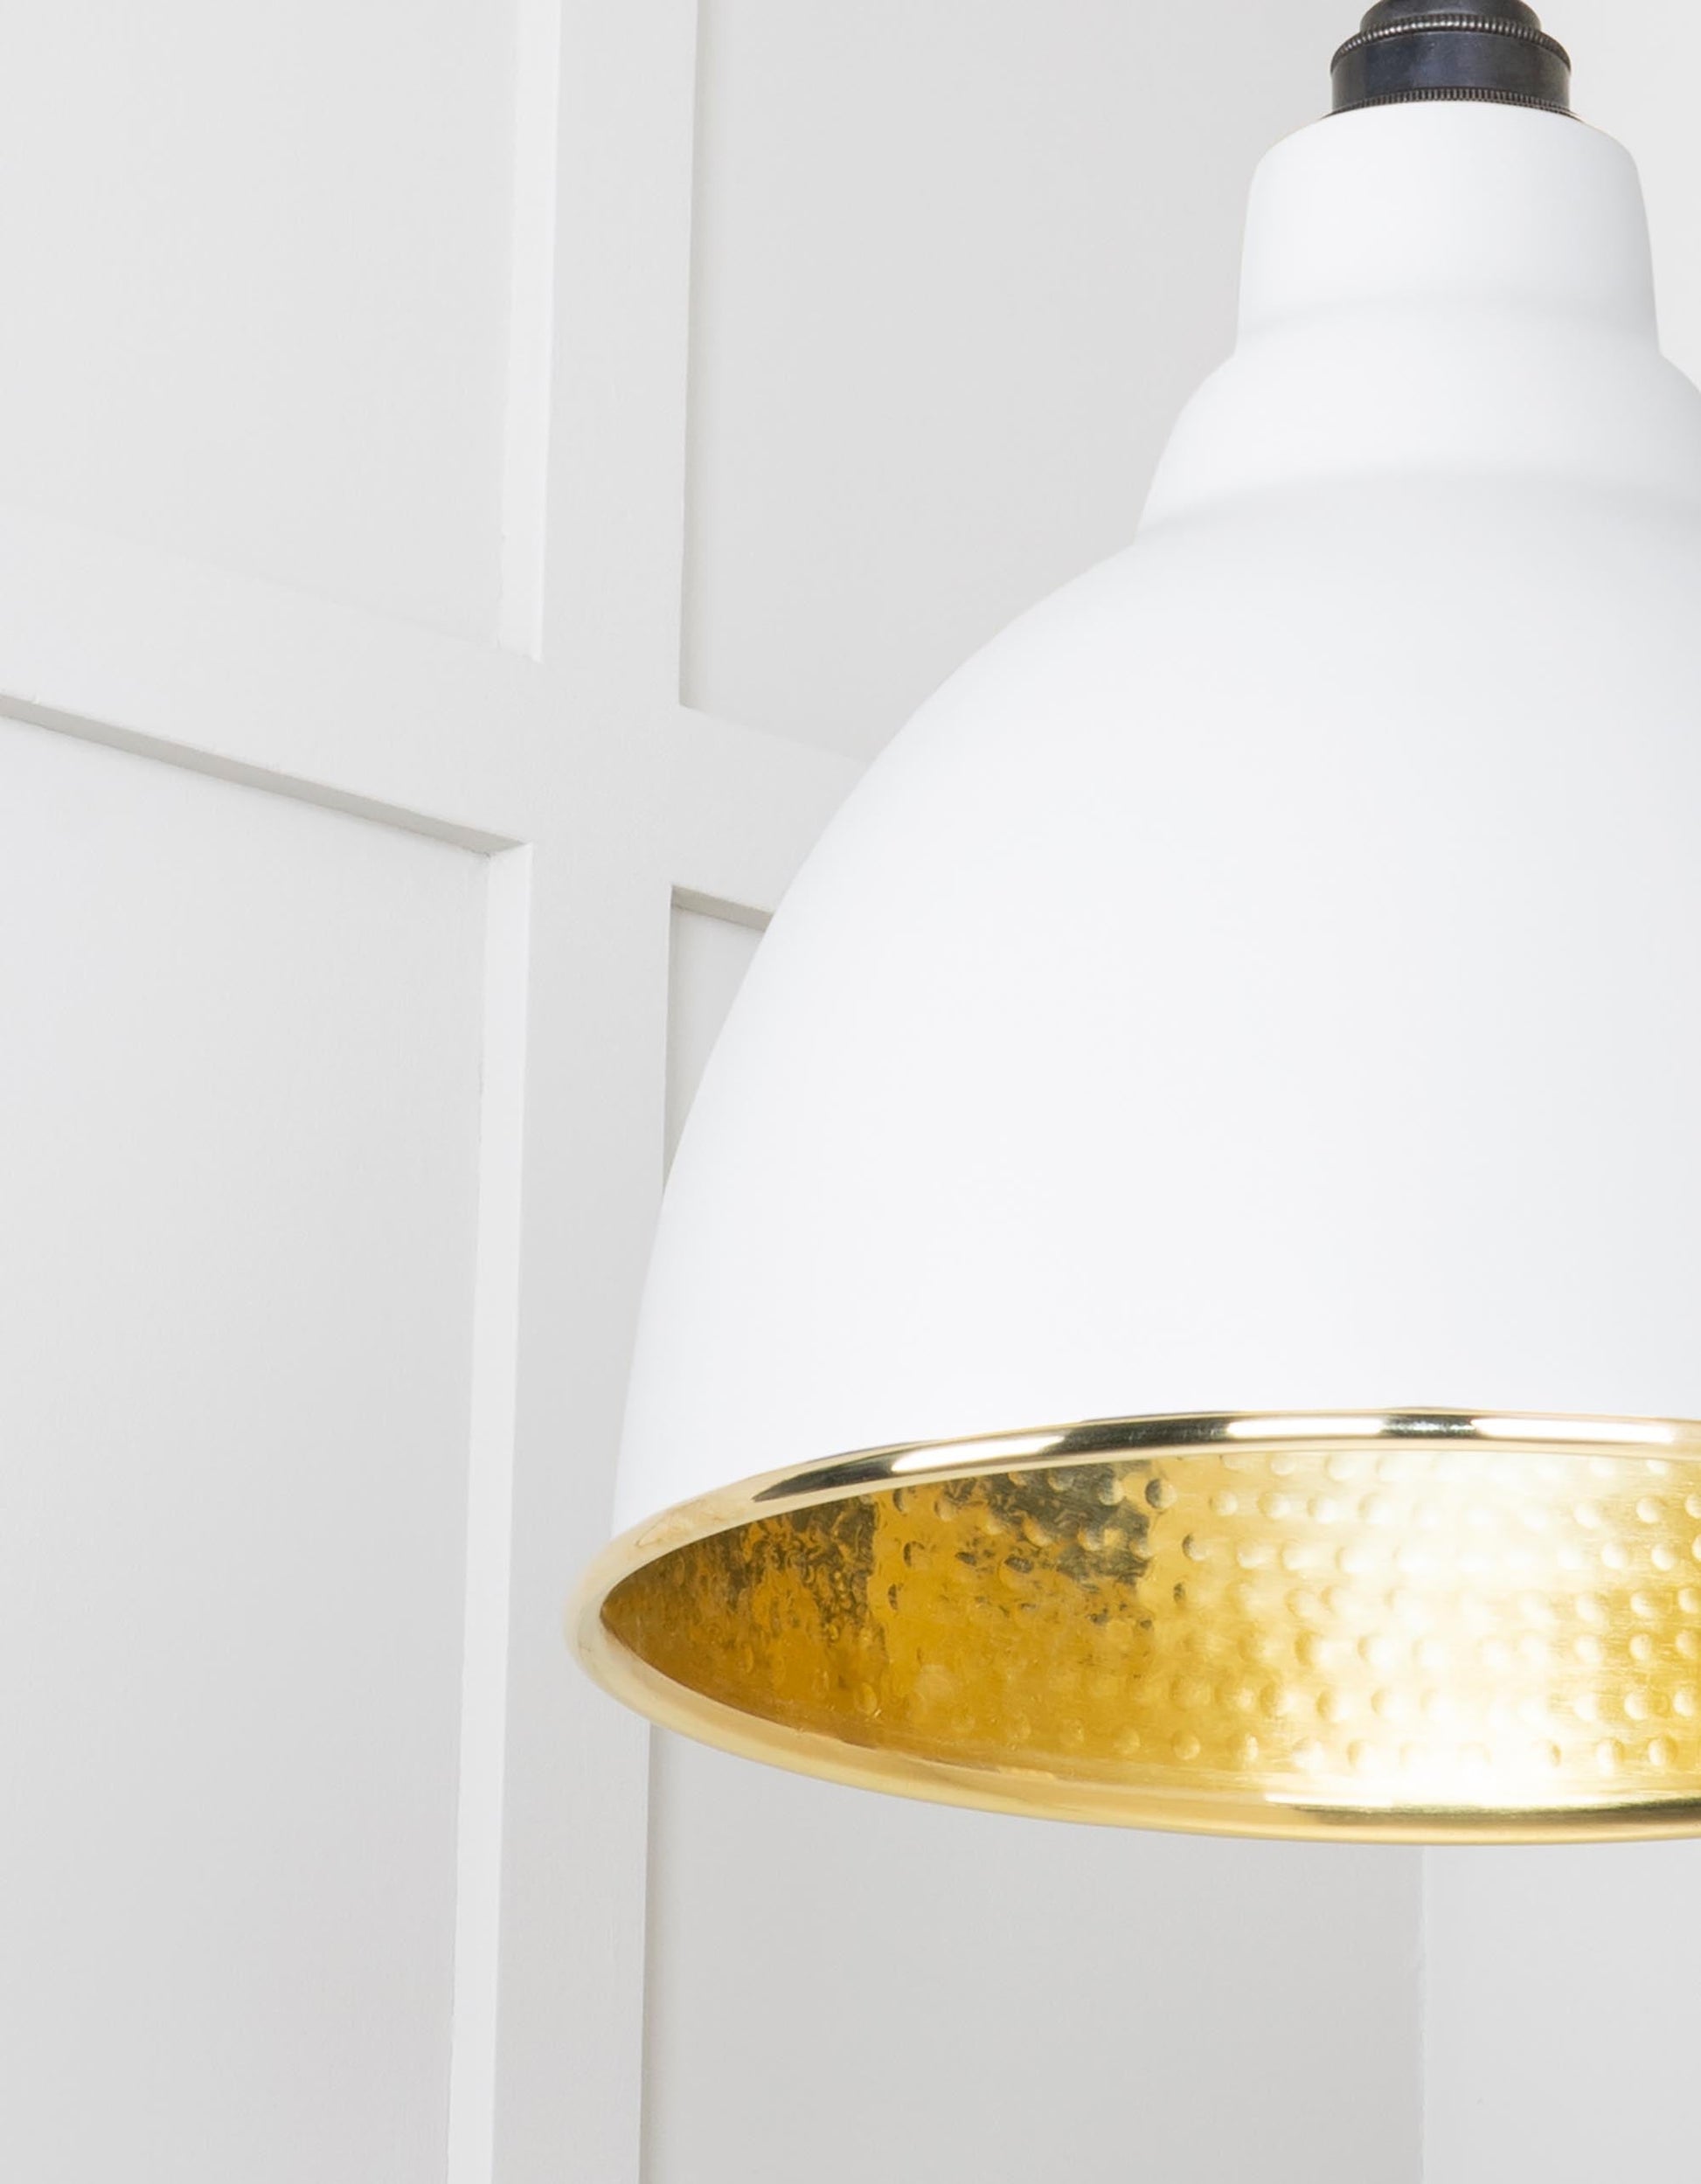 Hammered Brass Brindley Pendant Light Flock, Detailed close up view of pendant.